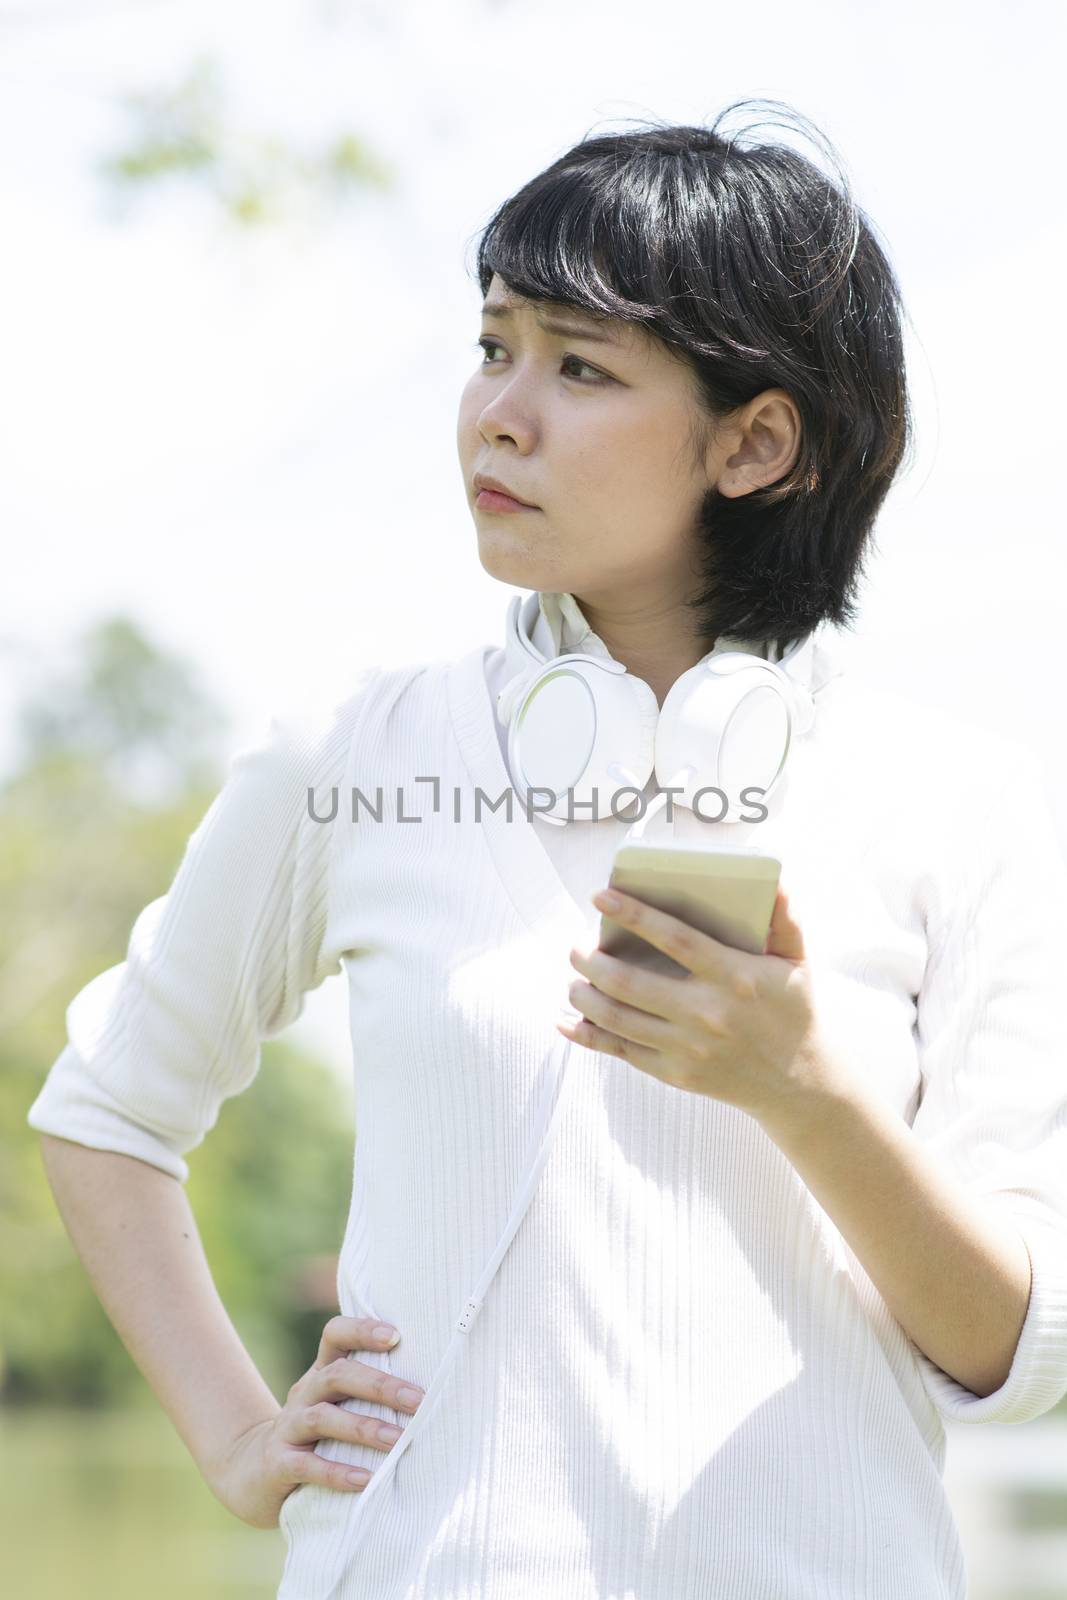 Worrying asian woman making phone call in garden. Blurry building background.